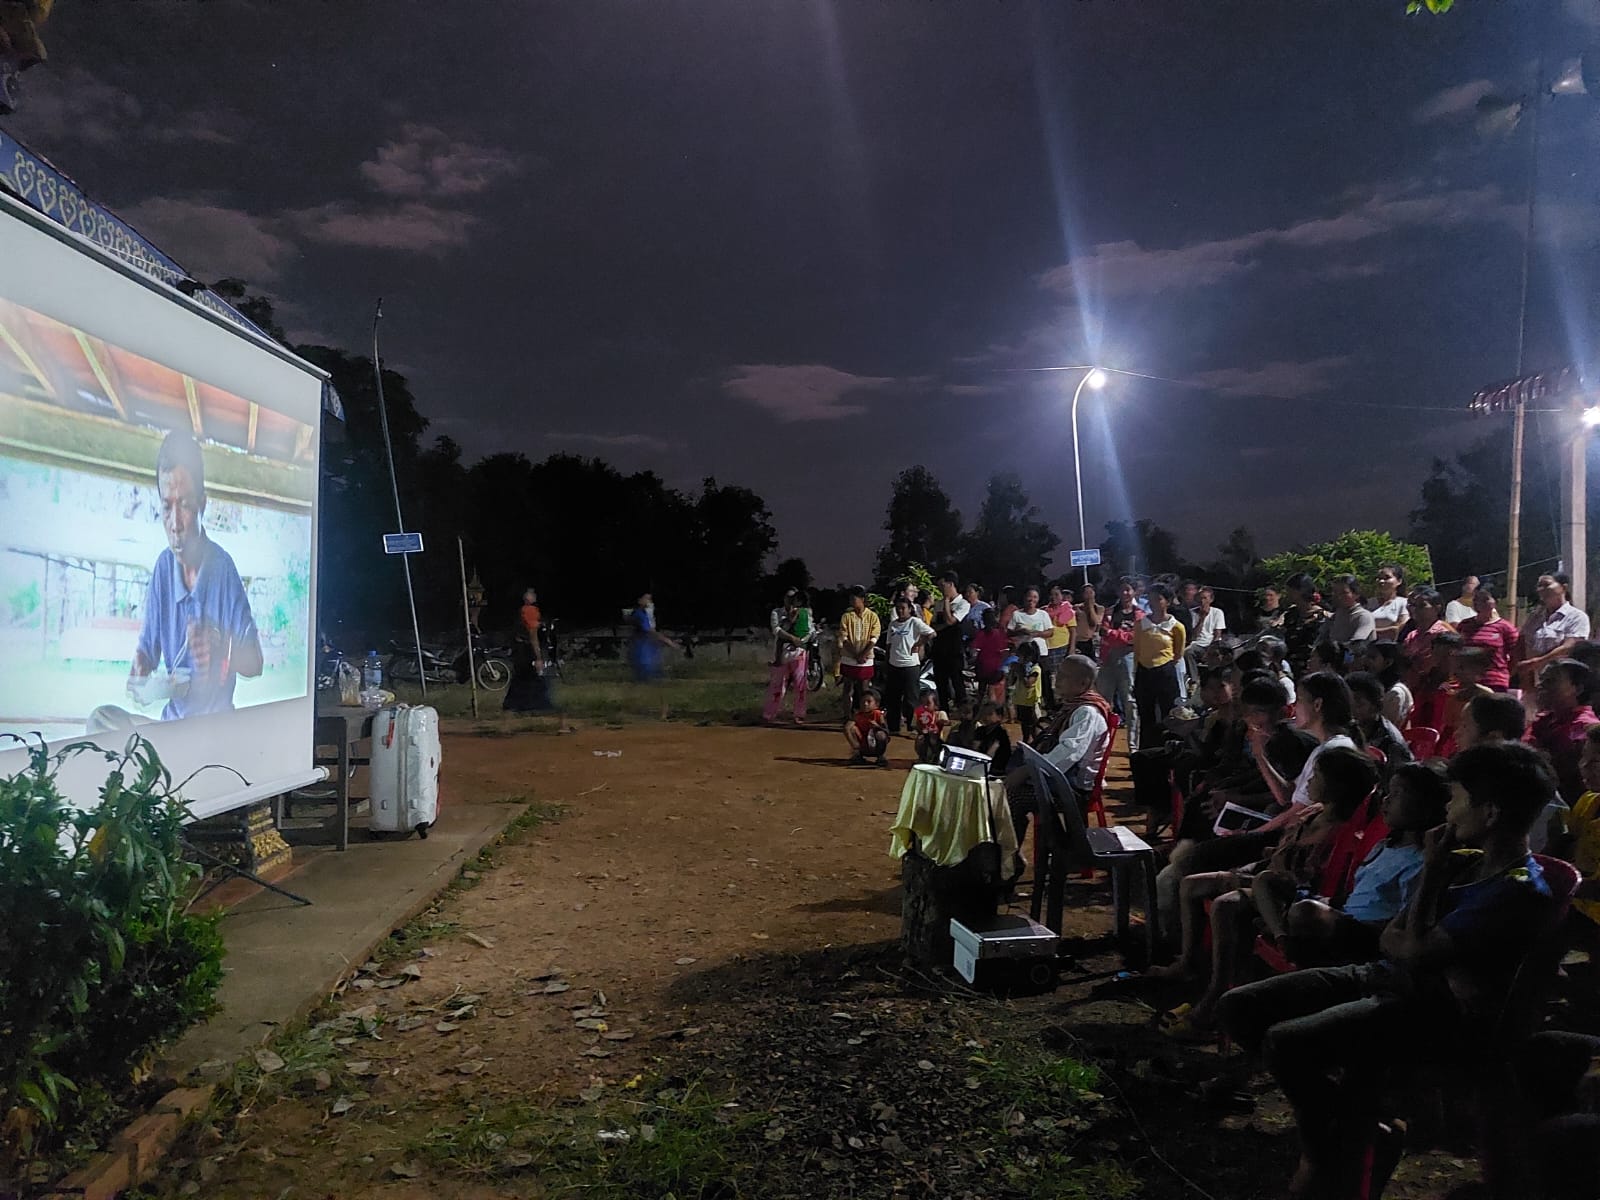 A crowd watches a large movie screen outdoors with trees in the background